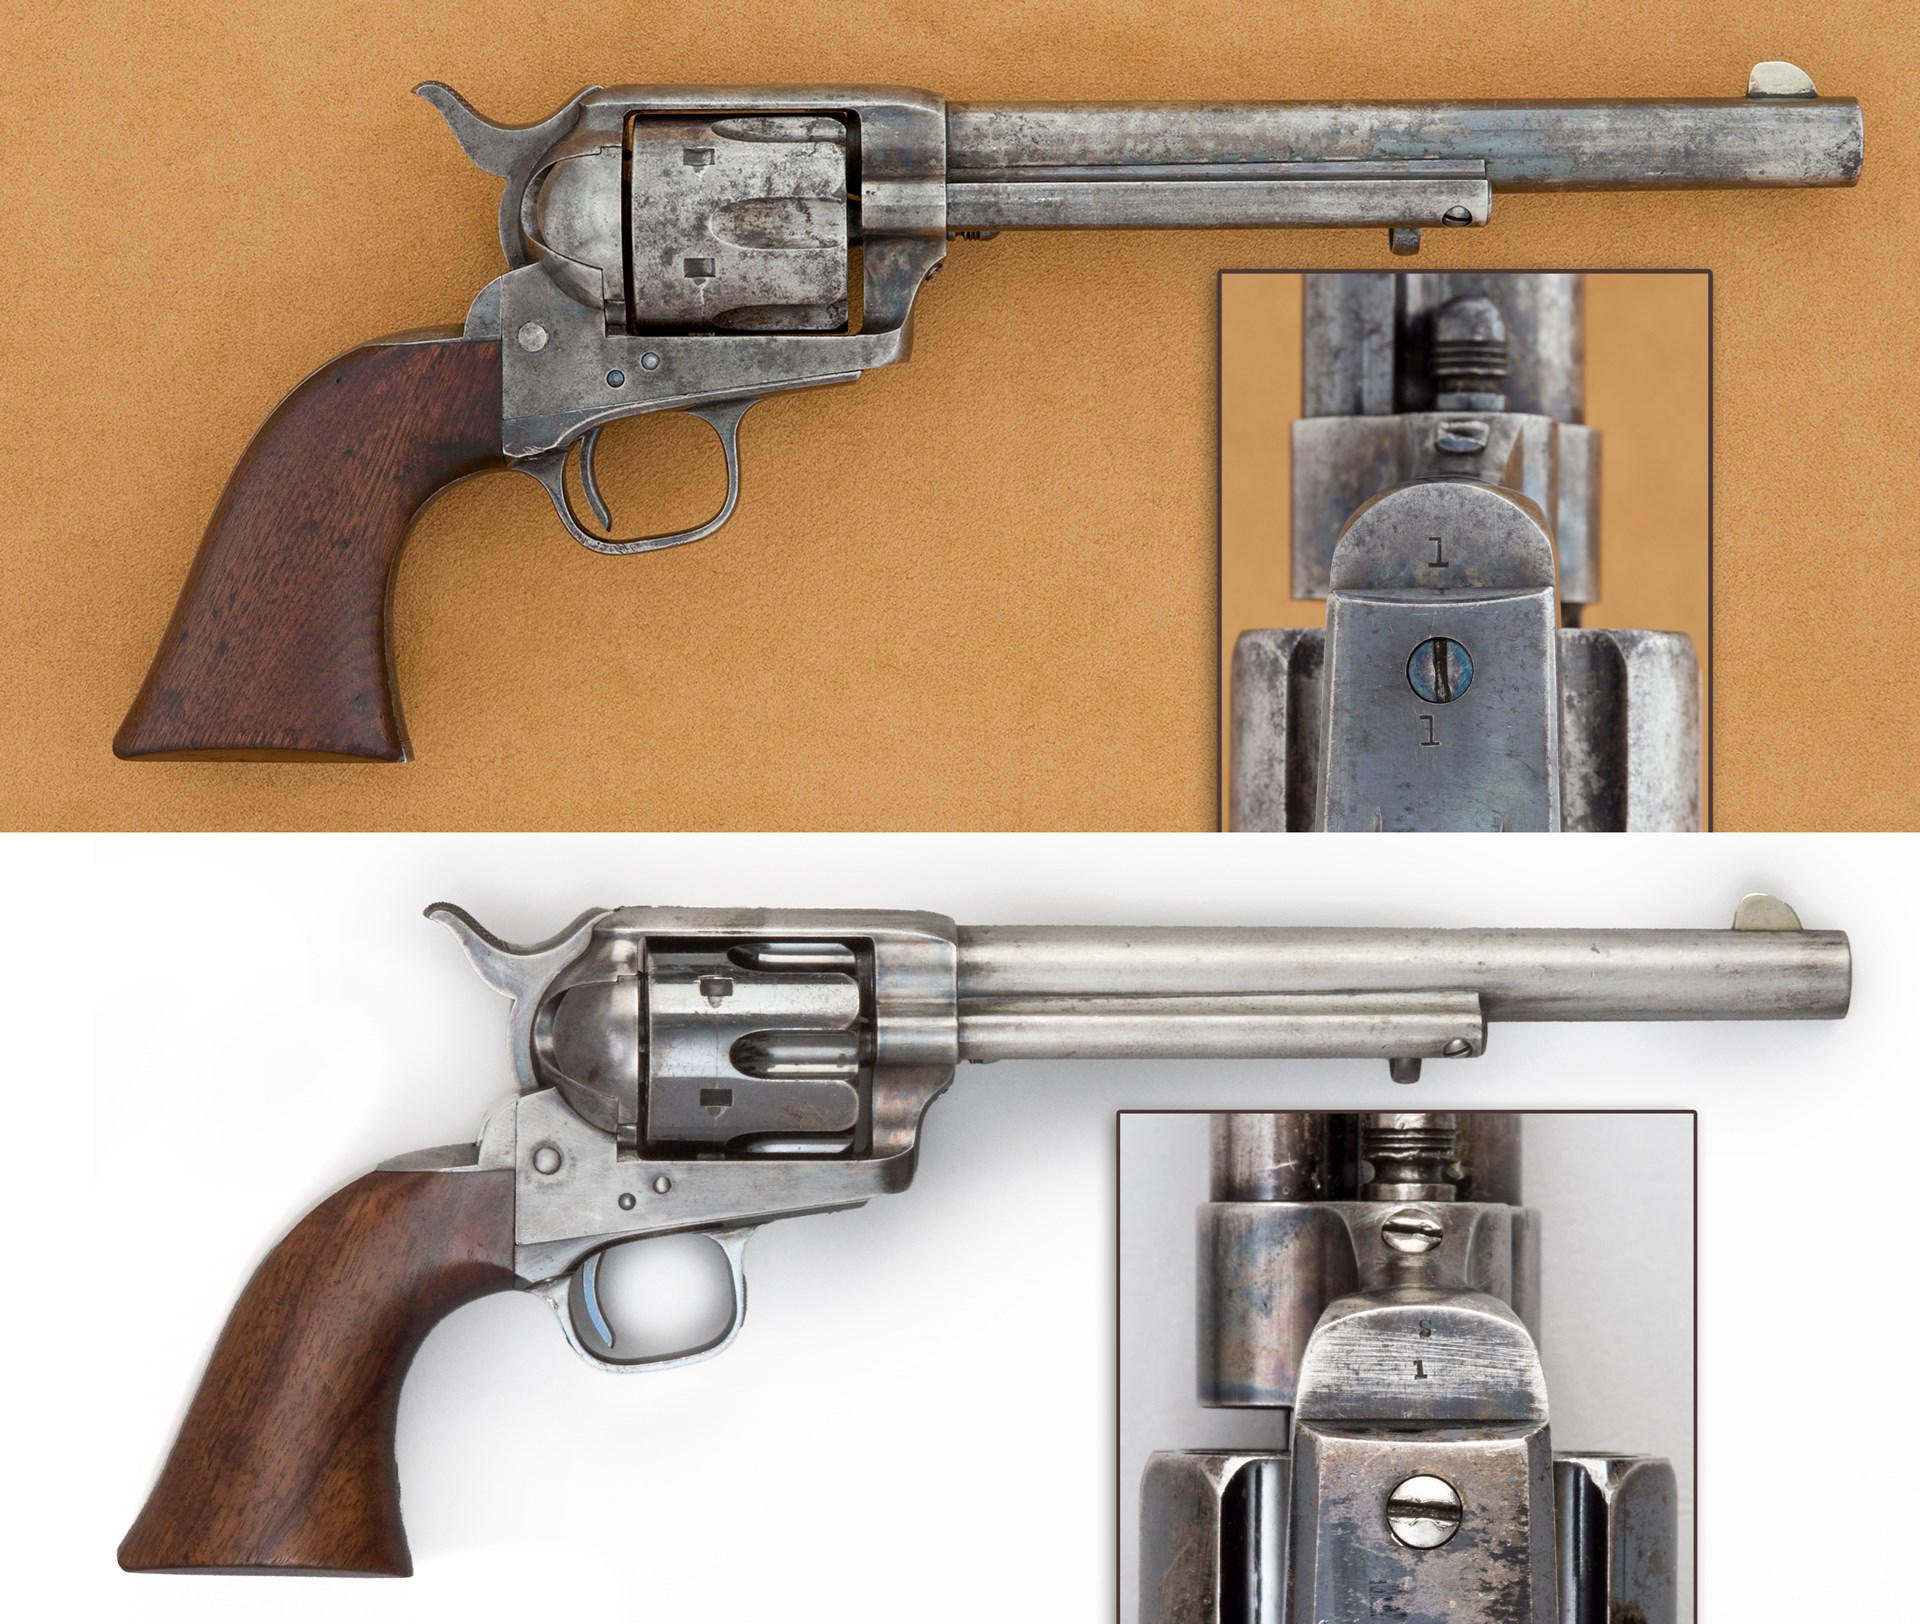 serial number one colt single action army revolver two old guns top bottom inset detail image stamp metal vintage